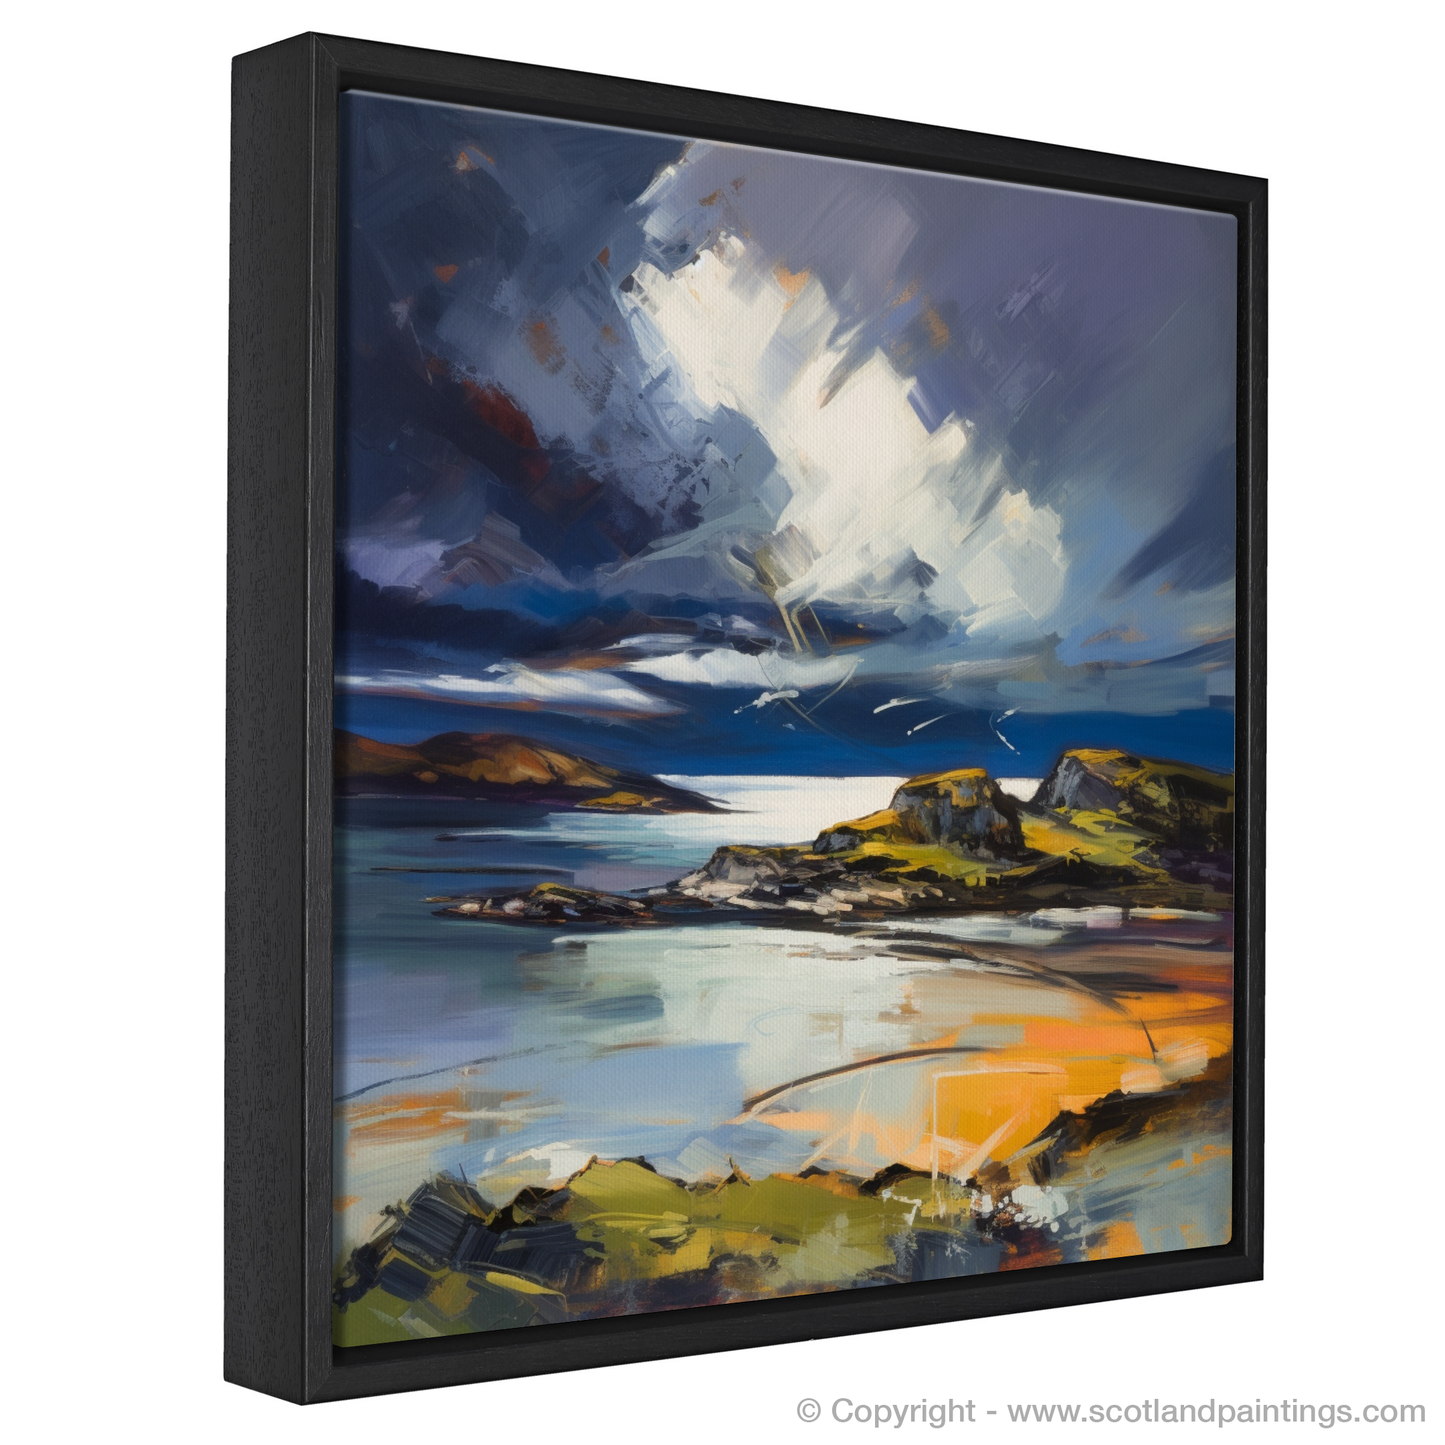 Painting and Art Print of Lochinver Bay with a stormy sky entitled "Tempestuous Skies over Lochinver Bay".